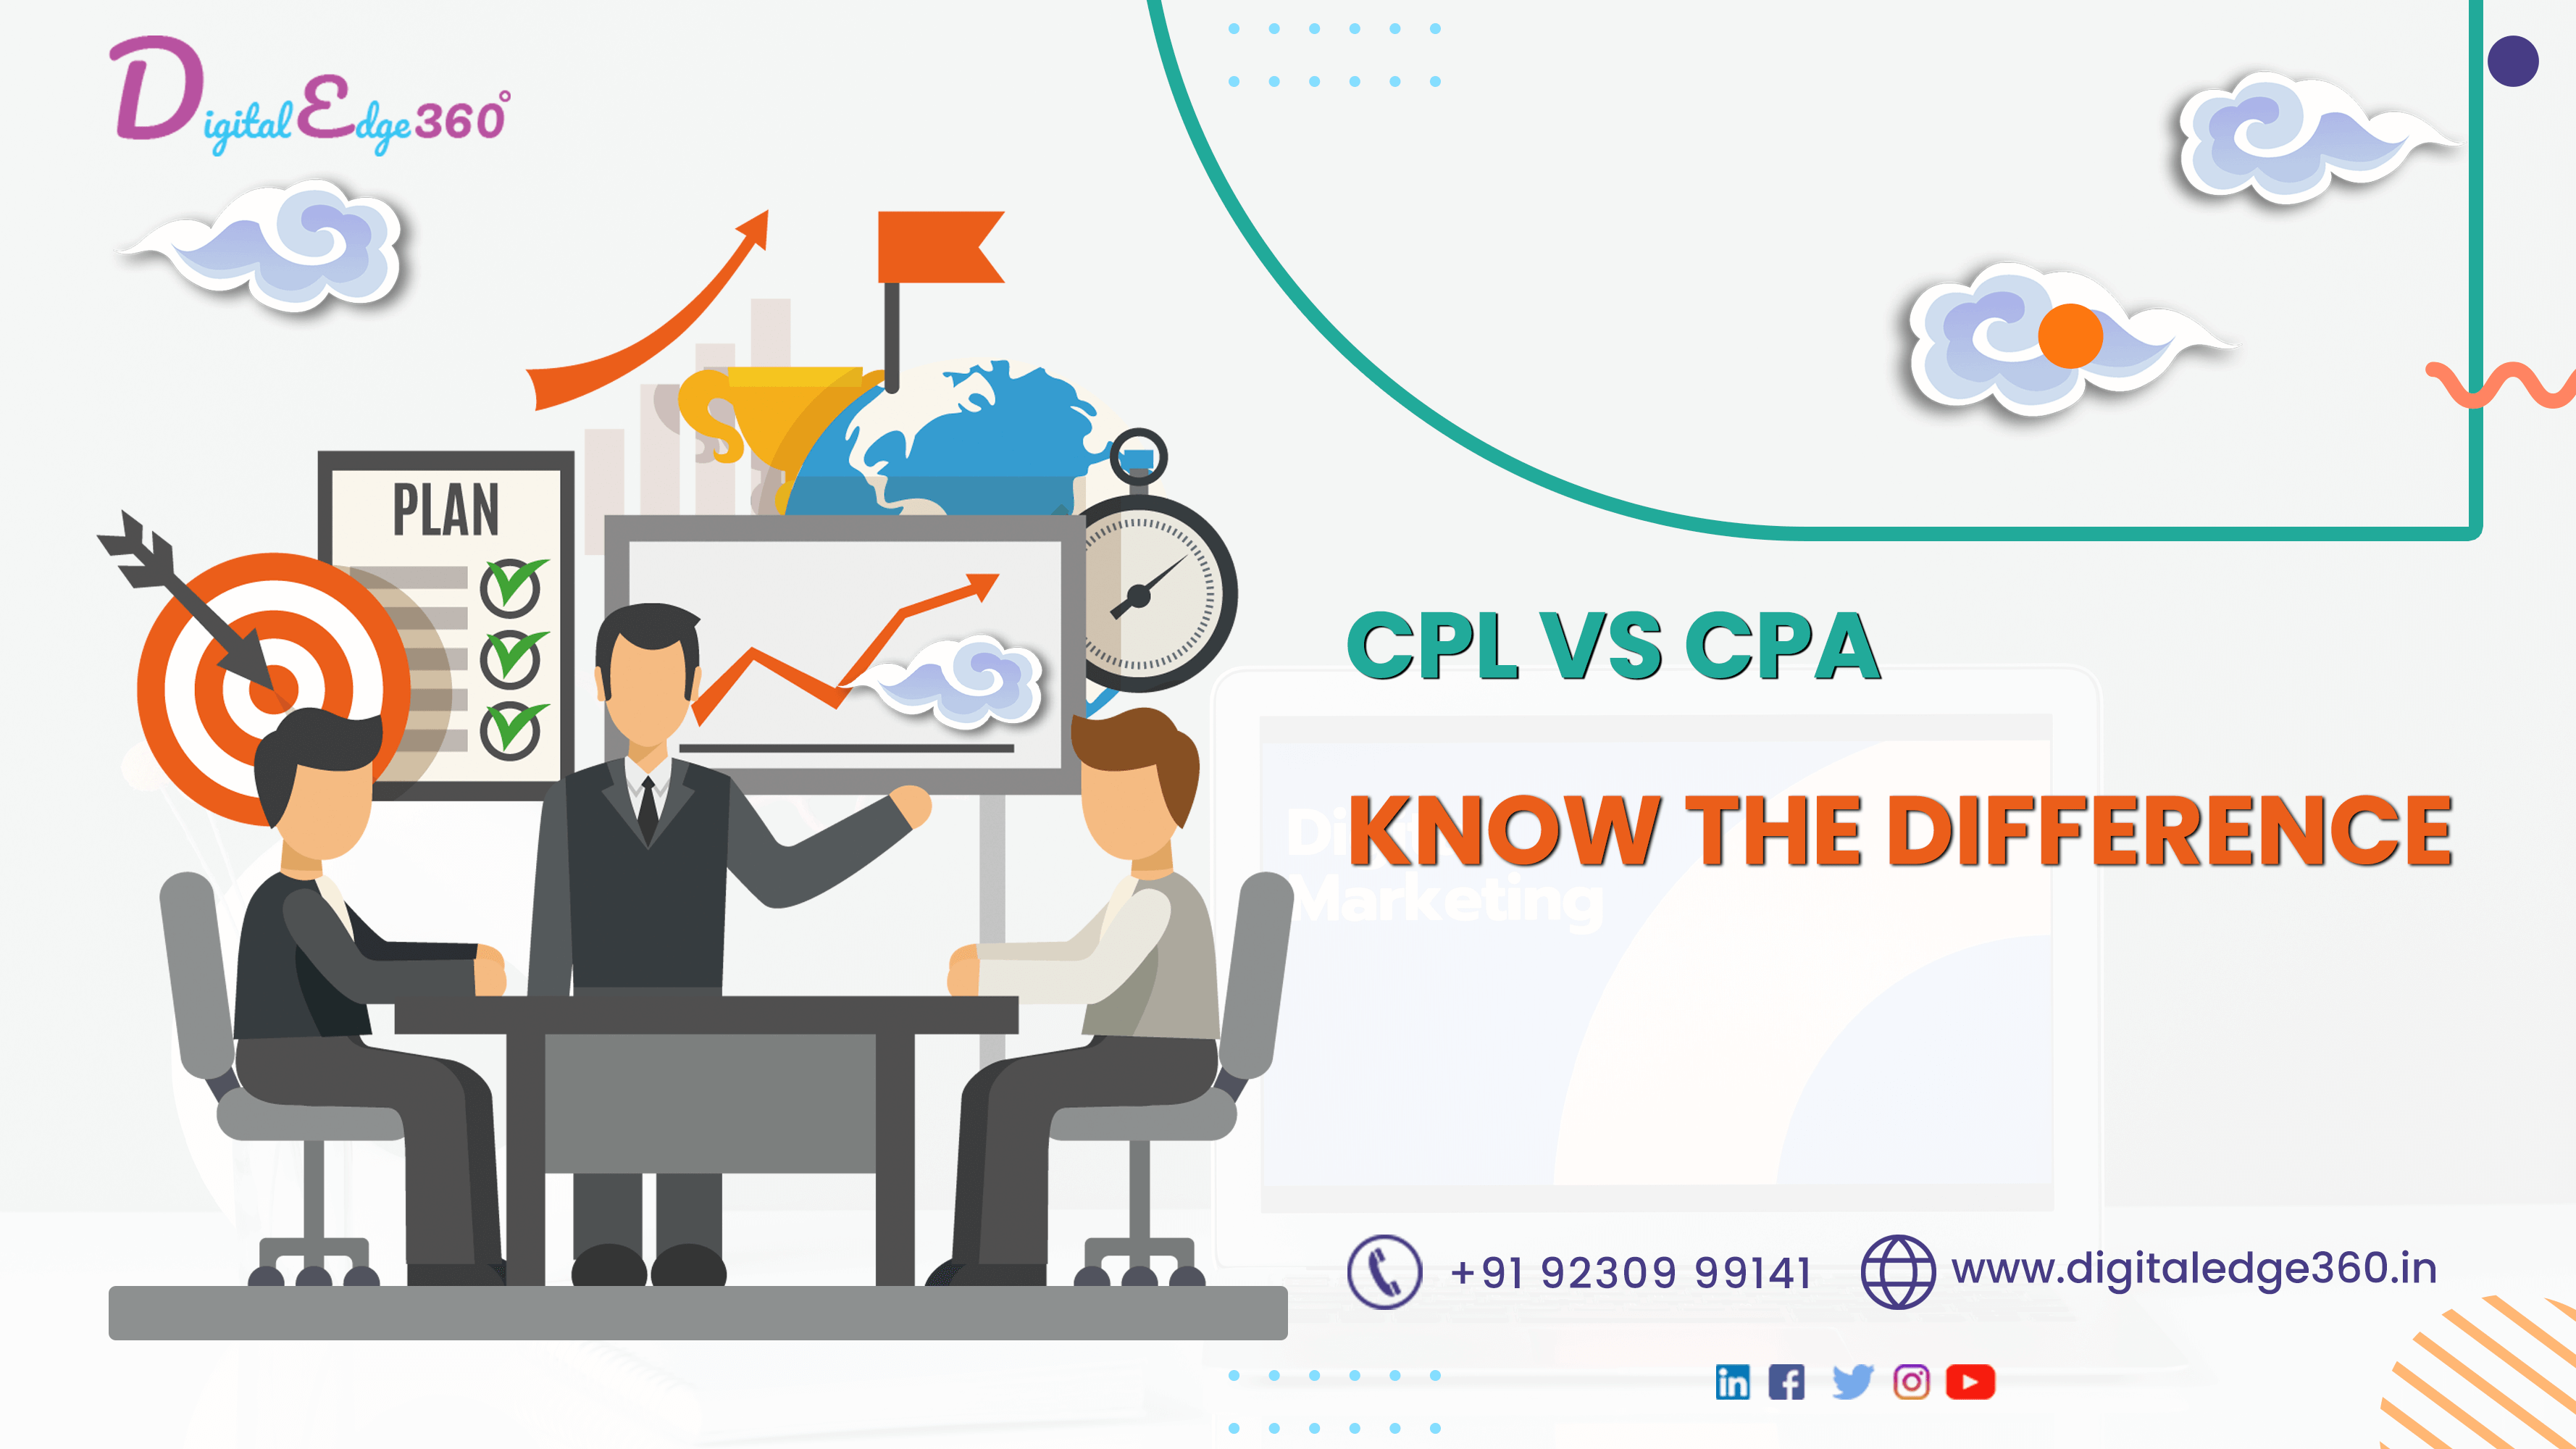 CPL vs CPA: Know The Difference